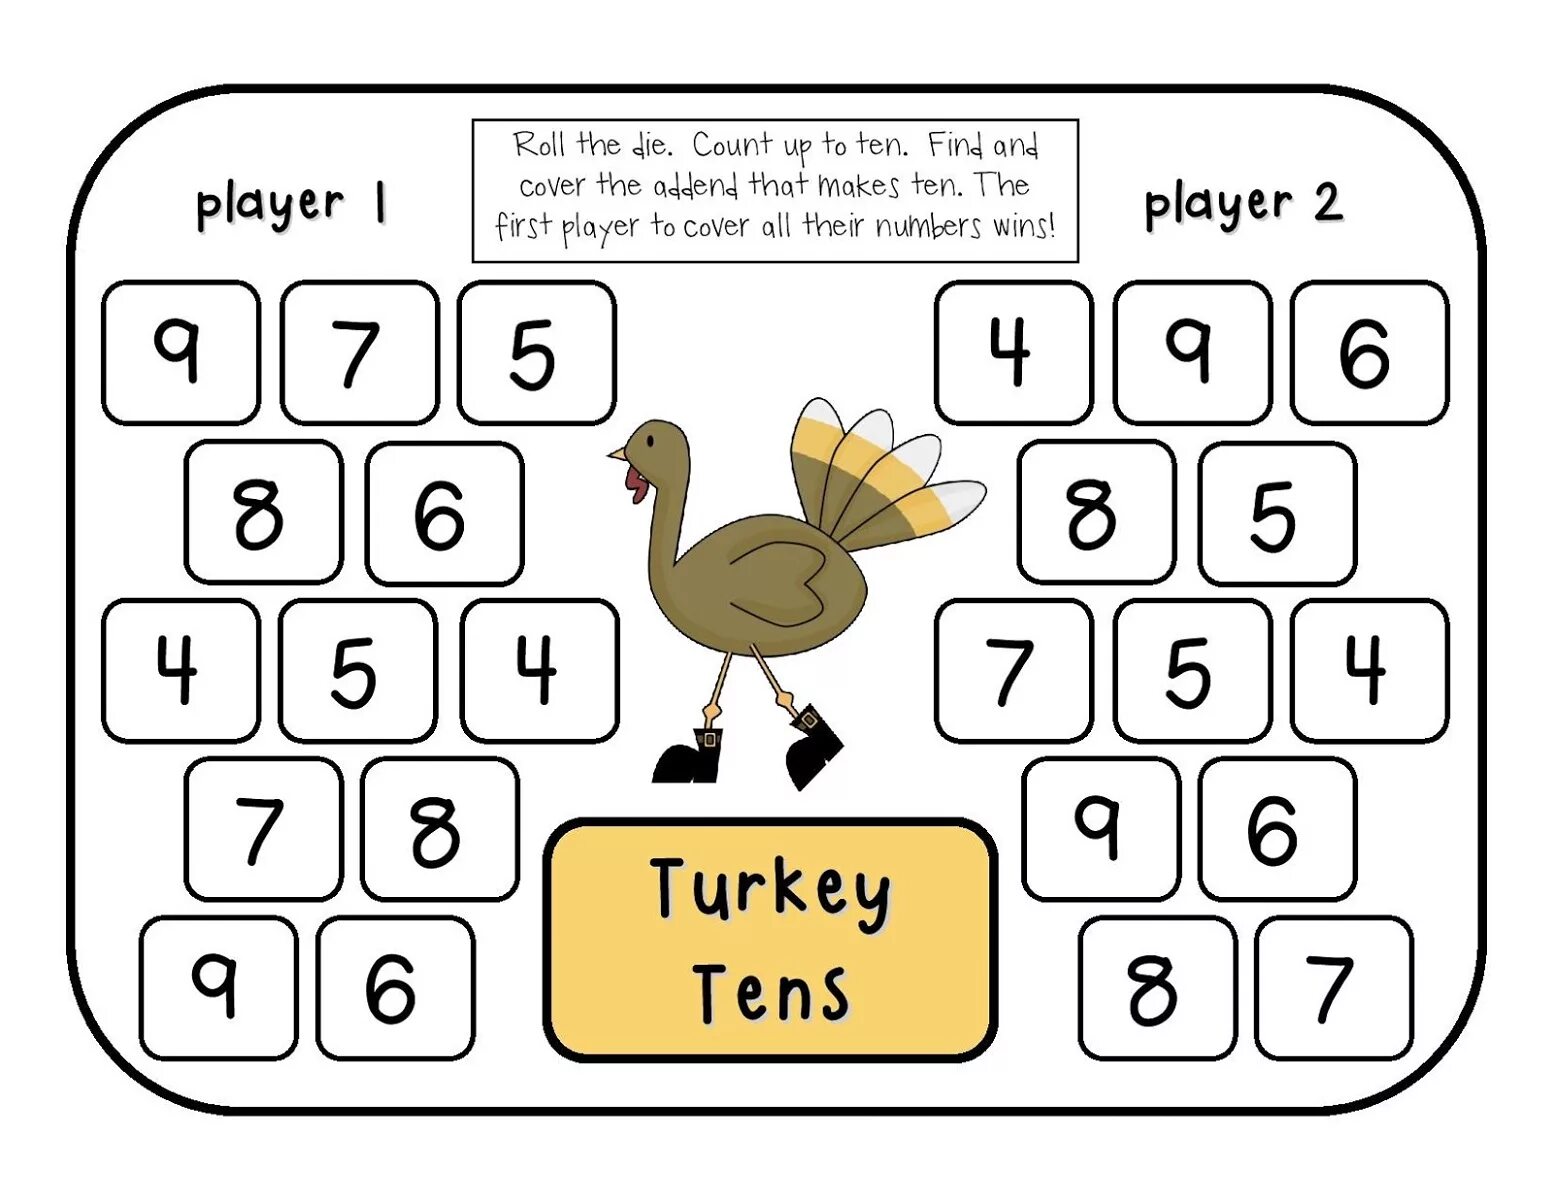 Turkey games. Games for Kids. Numbers Board game for Kids. English games for Kids. Games Worksheets for Kids.